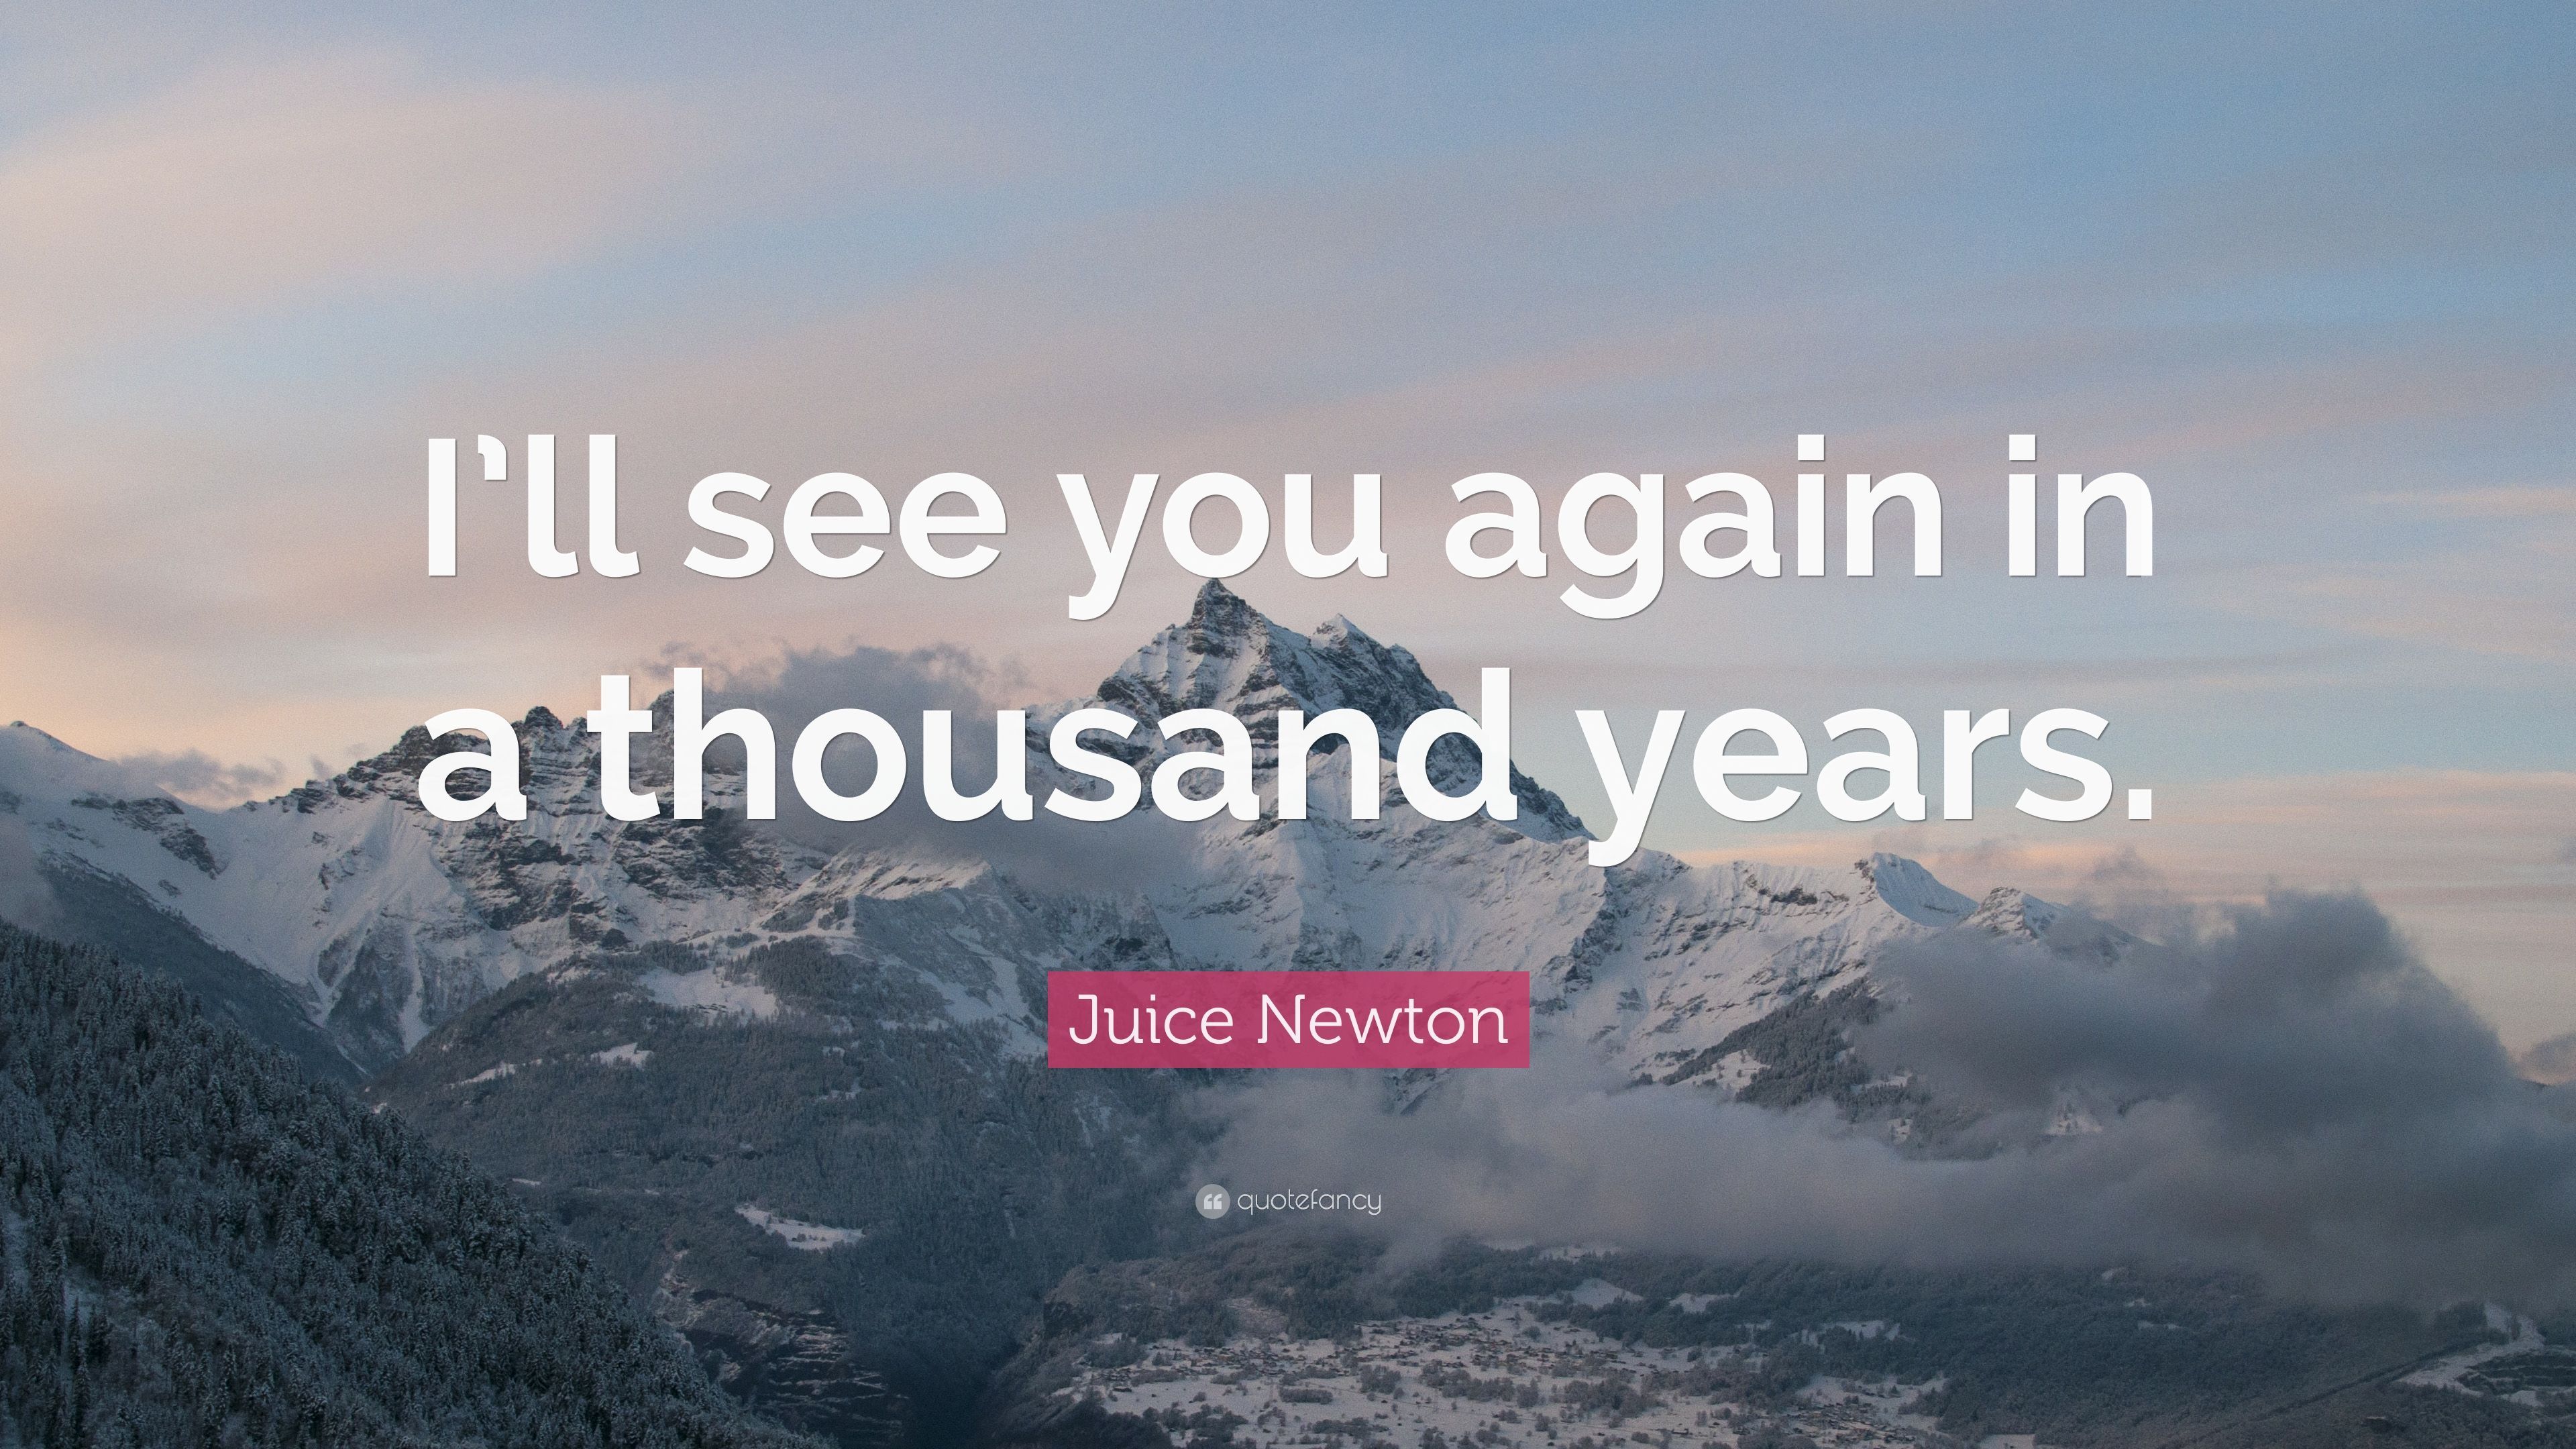 Juice Newton Quote: “I'll see you again in a thousand years.” 7